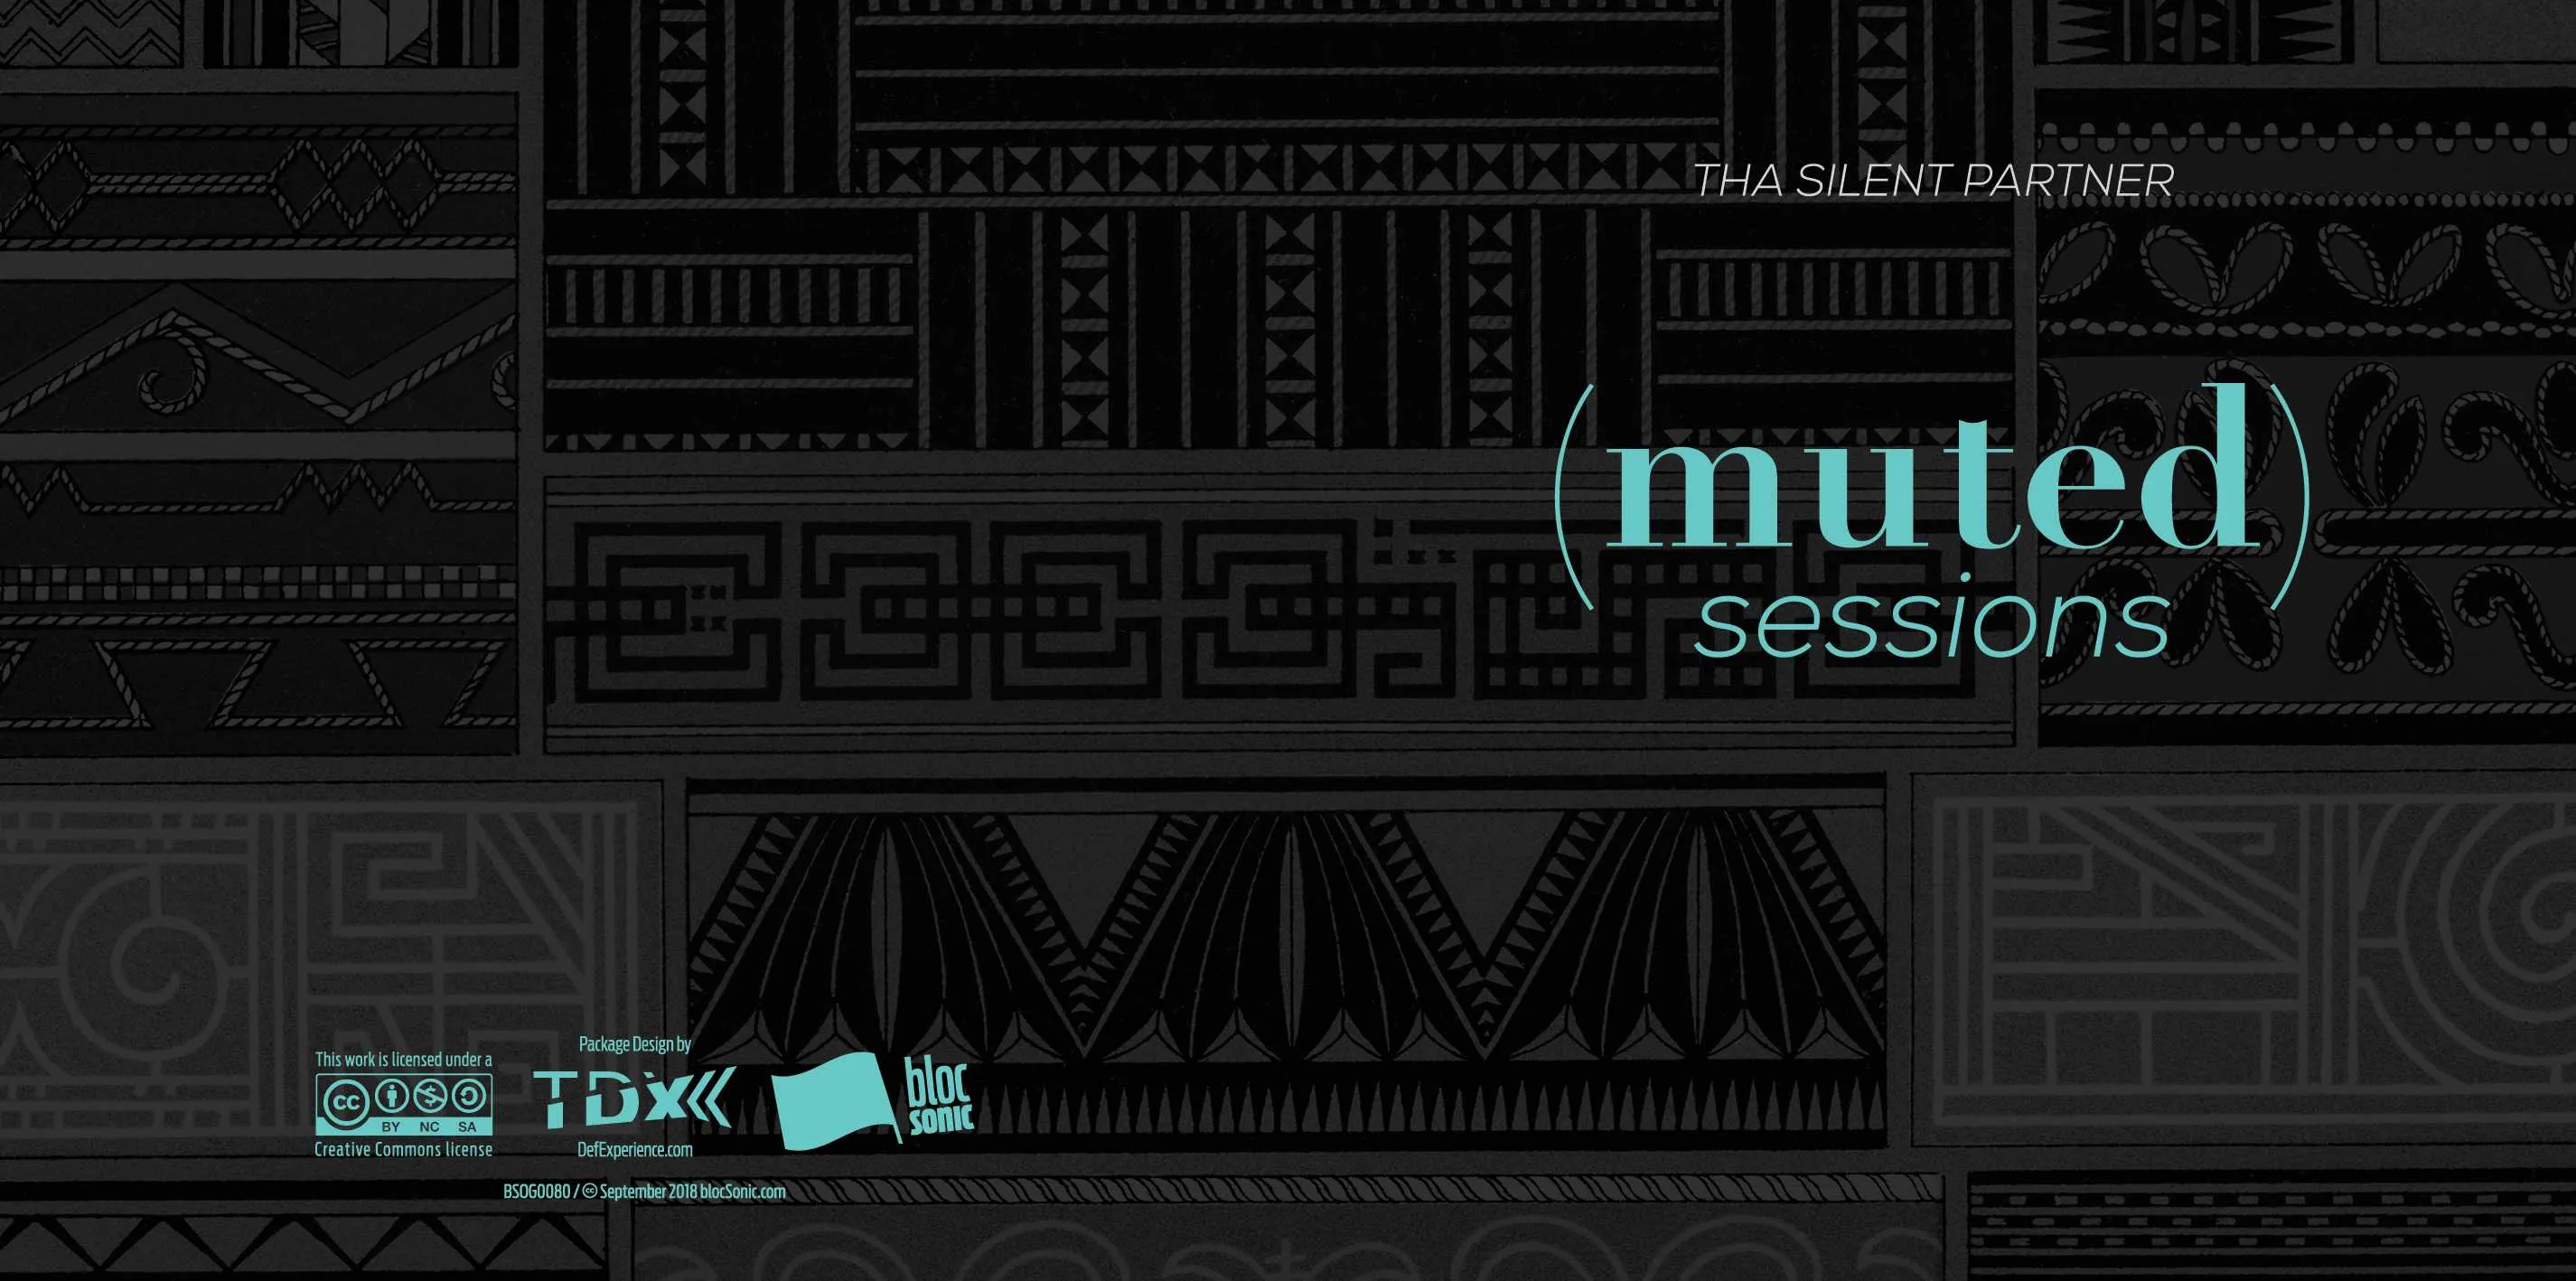 Album insert for “(muted) Sessions” by Tha Silent Partner